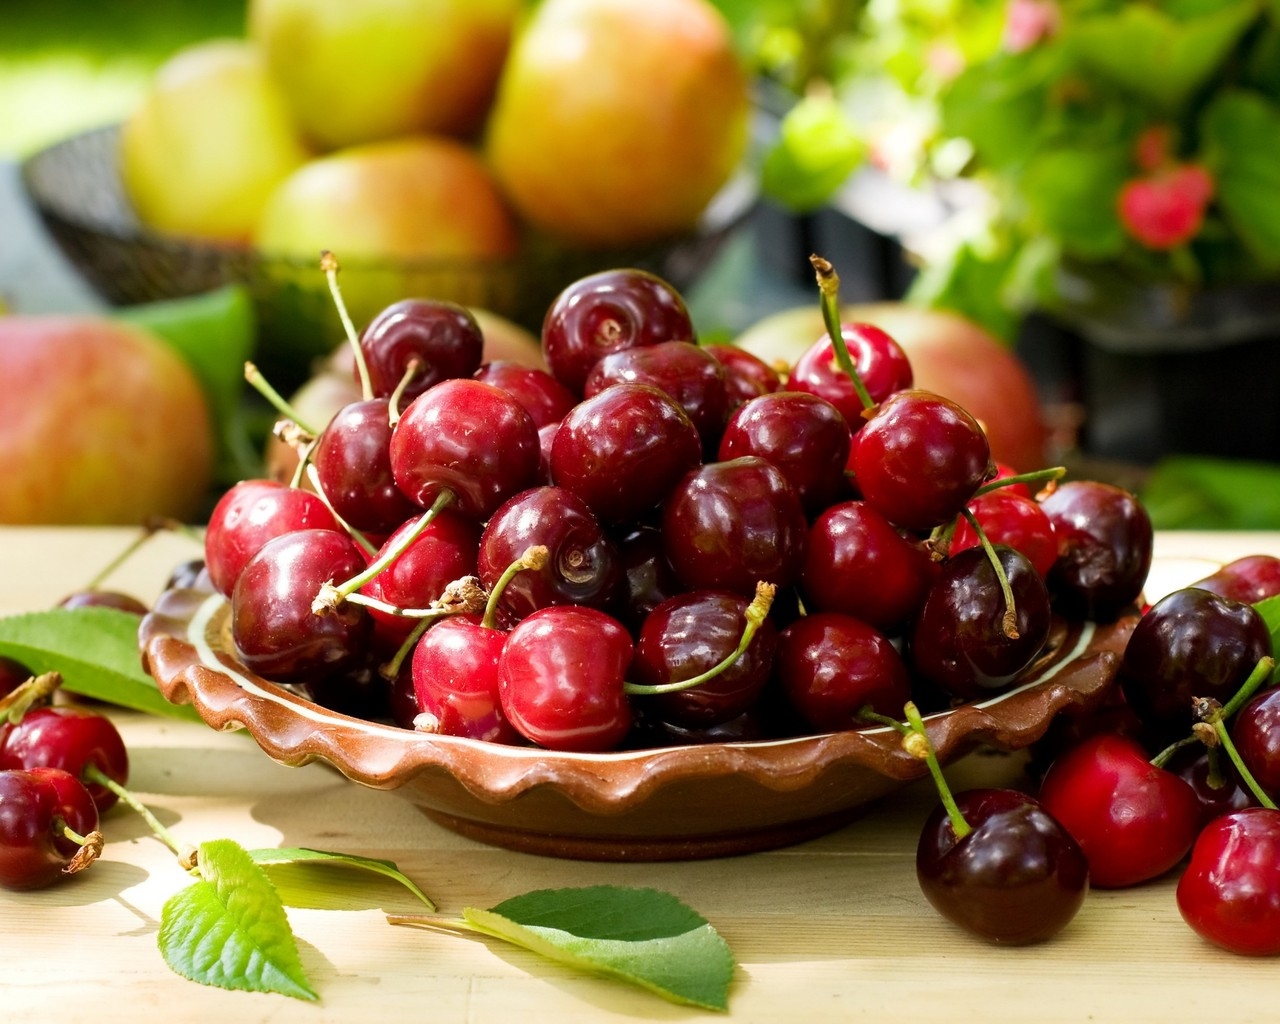 Bowl of Cherries for 1280 x 1024 resolution